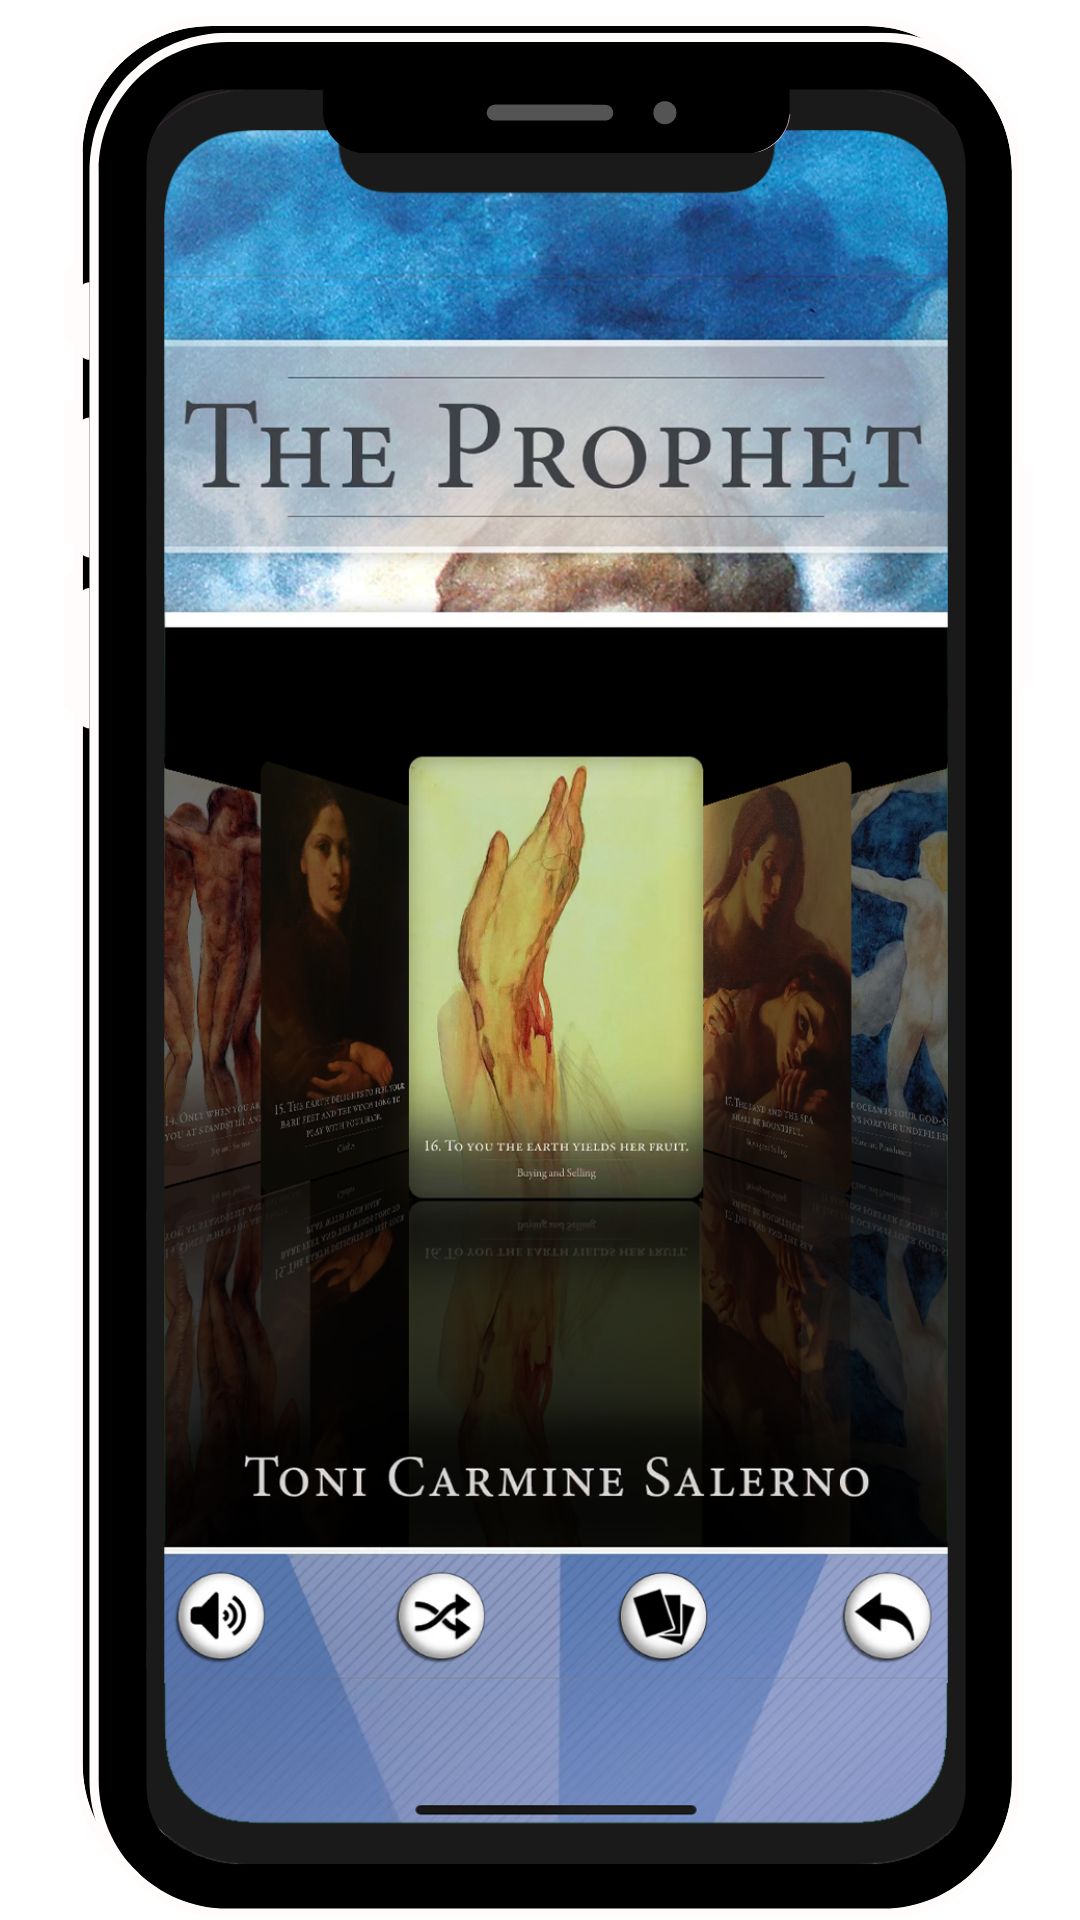 Kahill Gibran’s The Prophet by Toni C. Salerno